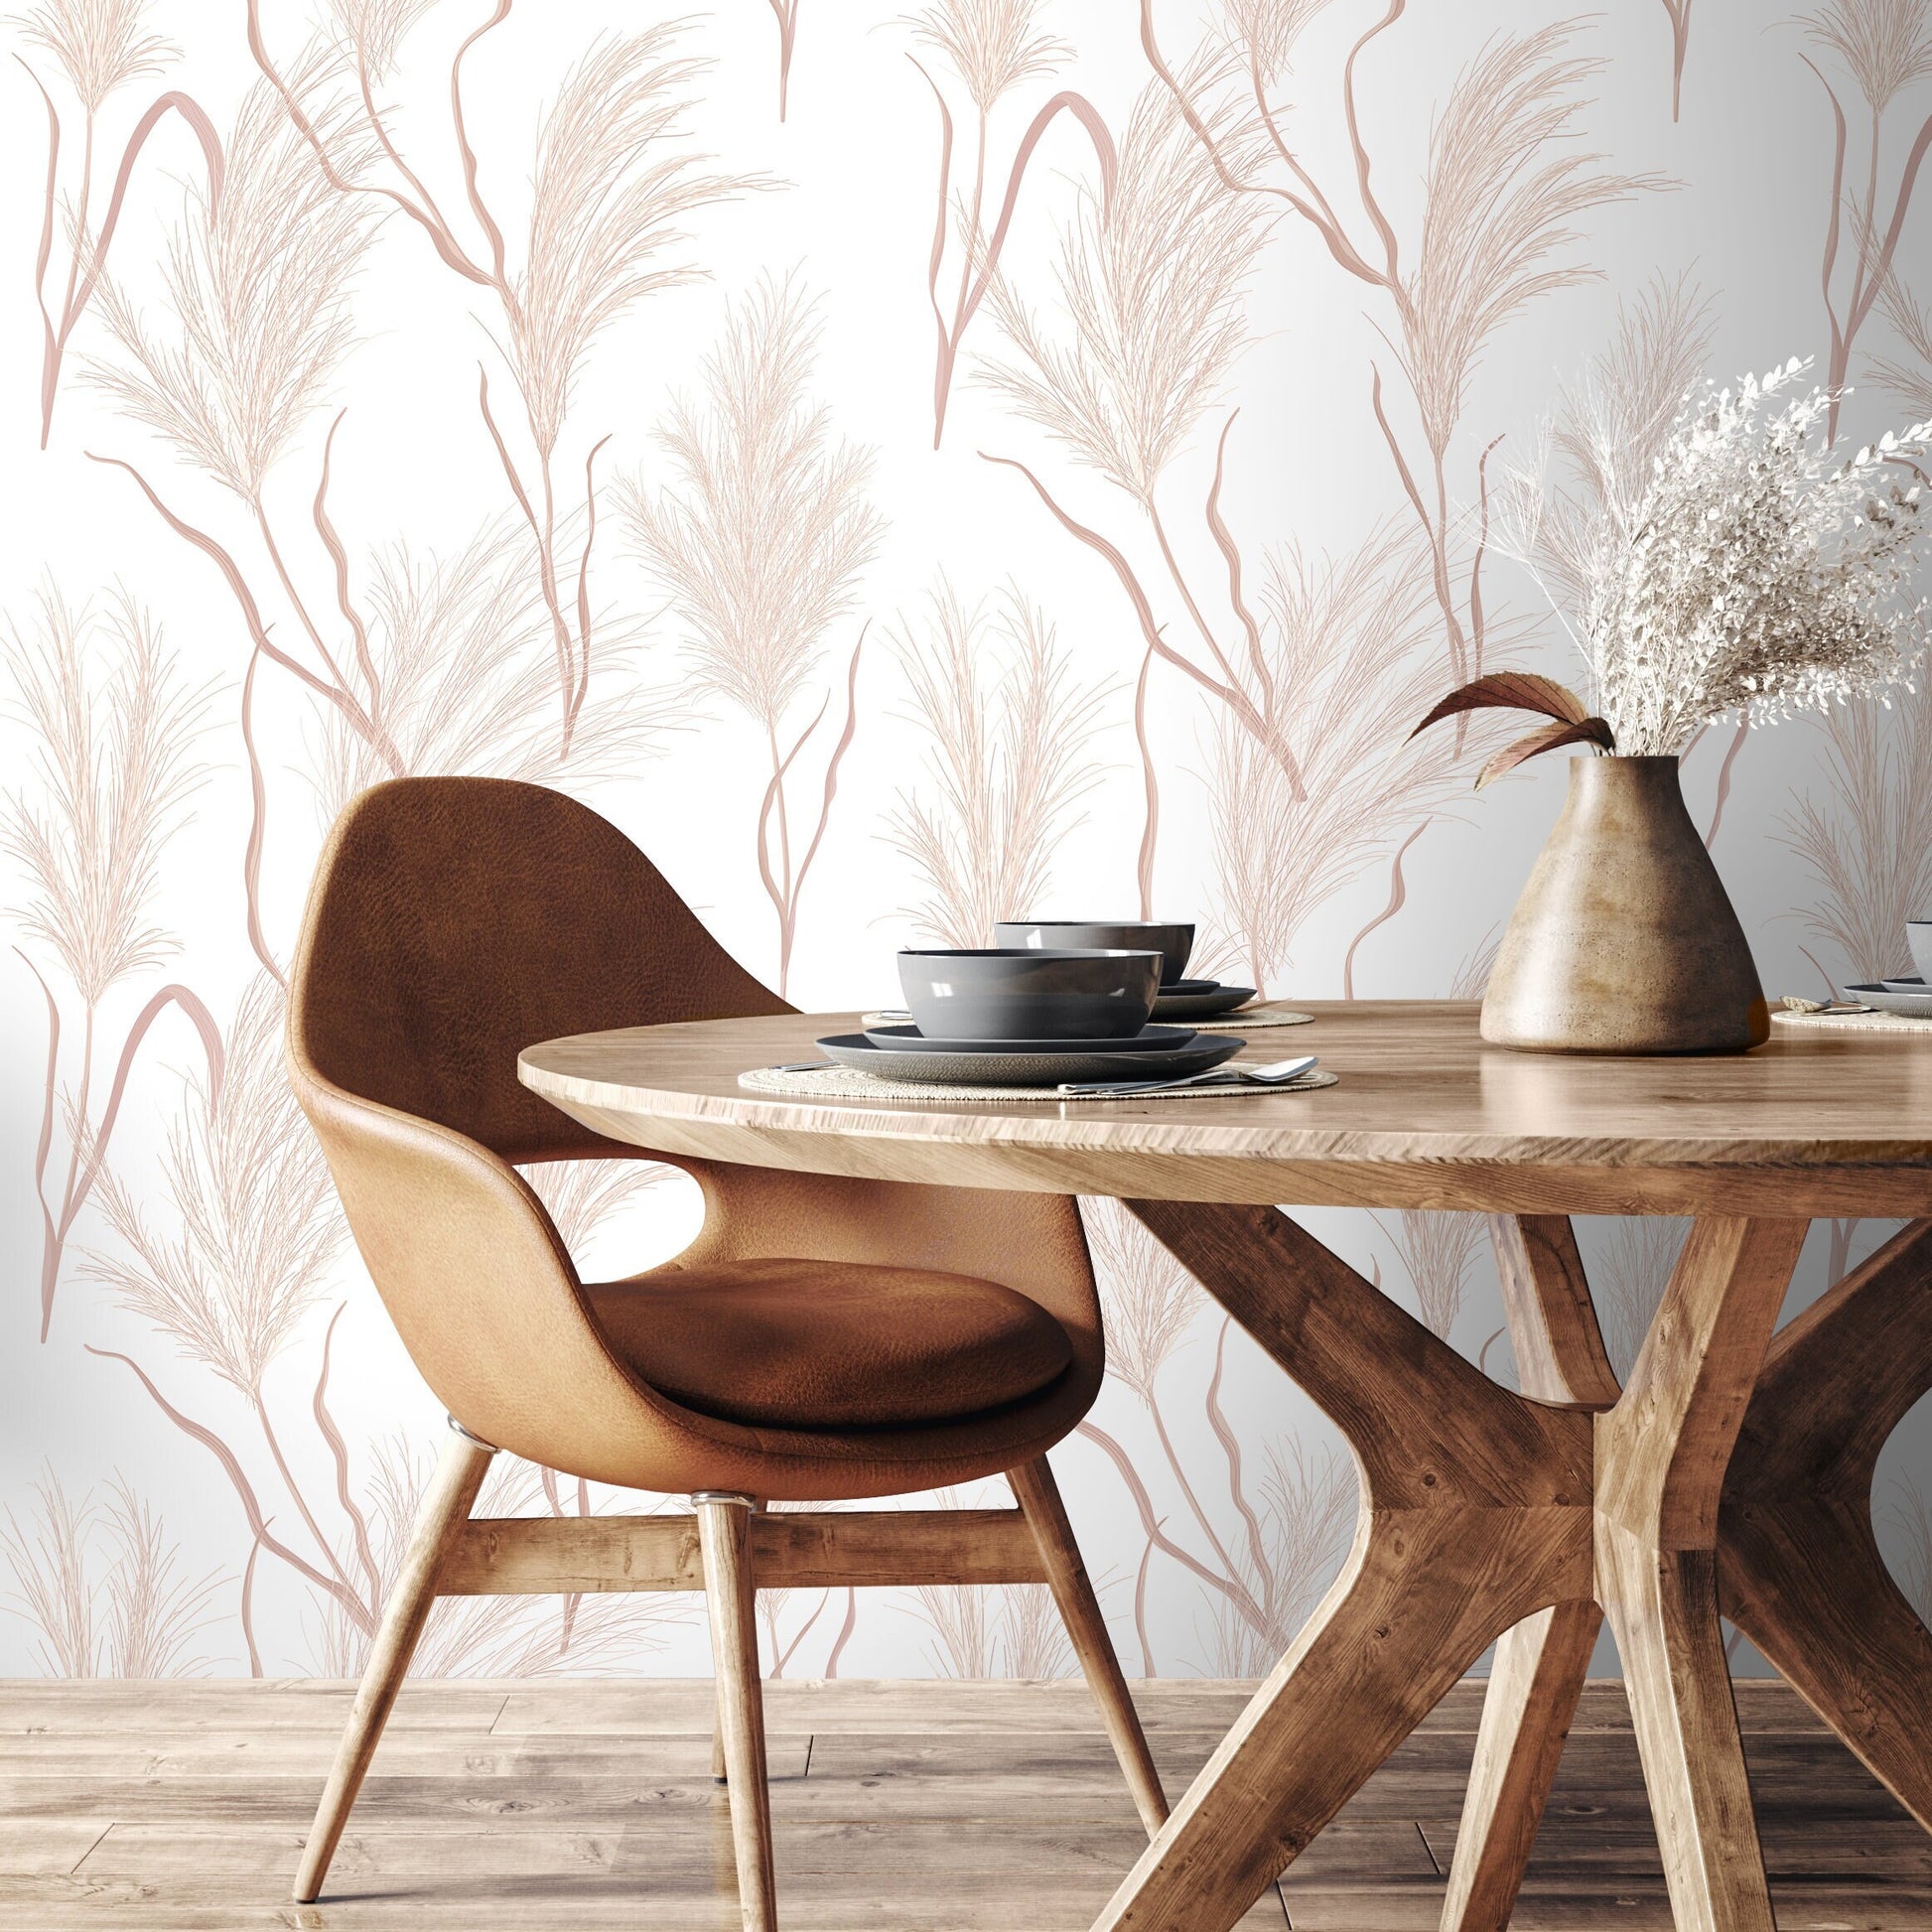 Wallpaper Peel and Stick Wallpaper Removable Wallpaper Home Decor Wall Art Wall Decor Room Decor / Leaves Wallpaper - C351